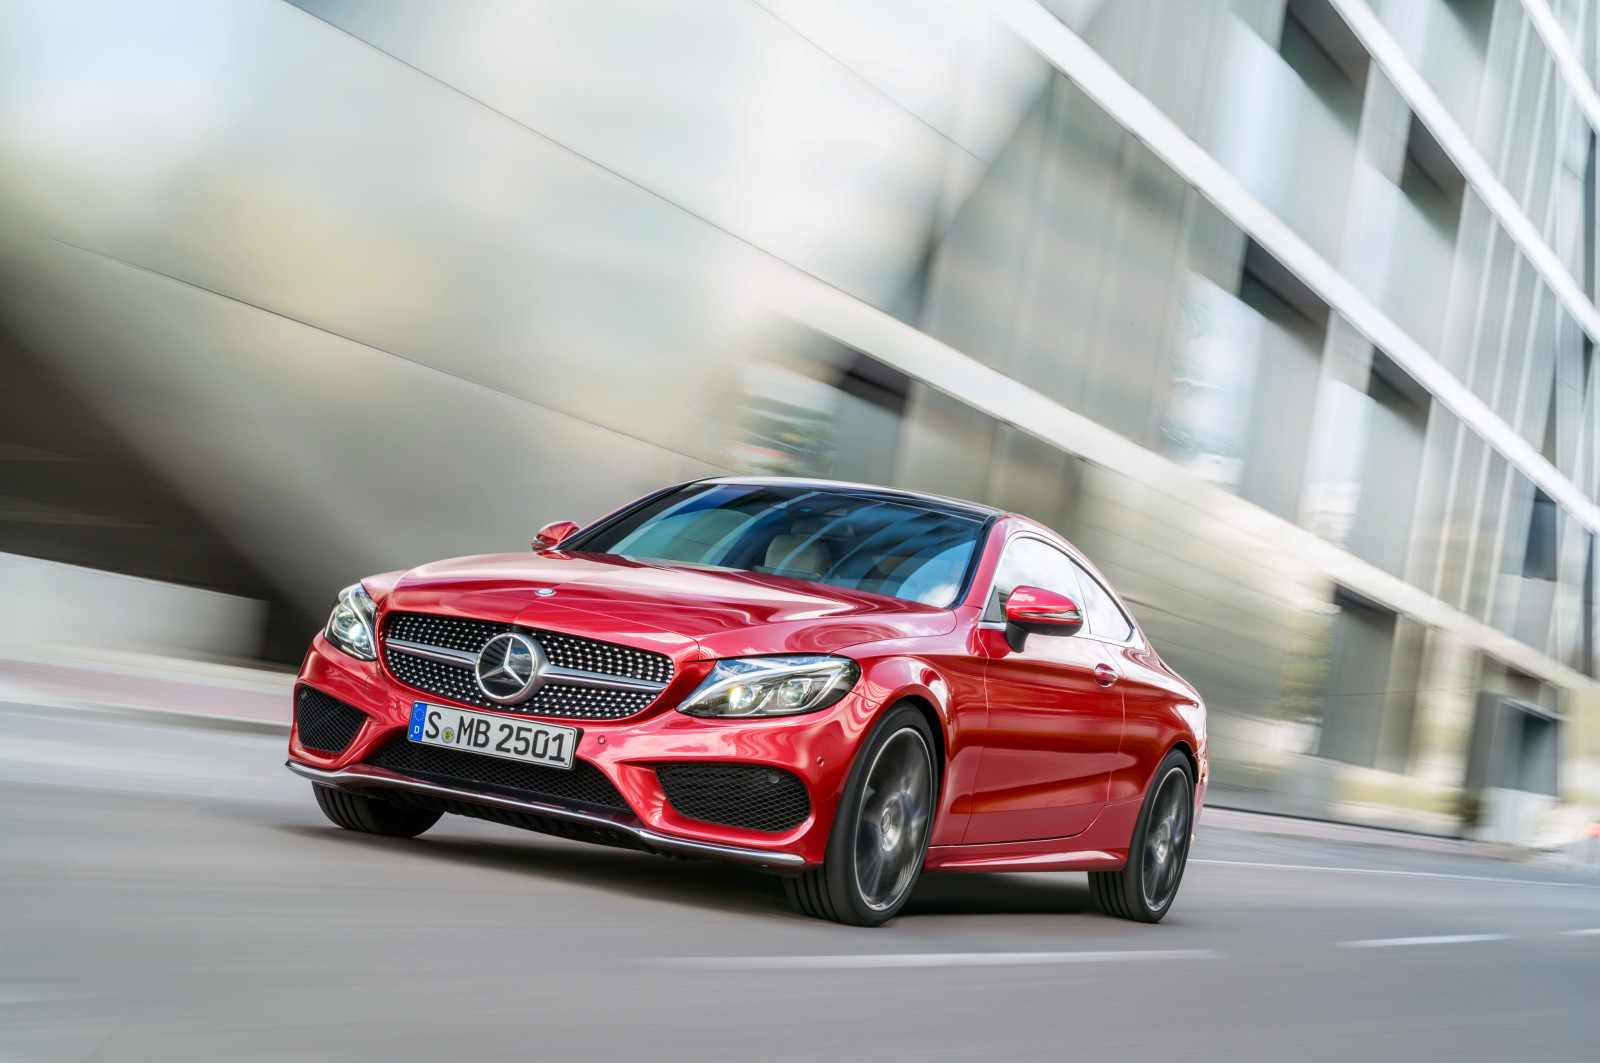 coupe, Mercedes-Benz, Xe Mercedes, AMG, C205, Lớp C, 4MATIC, 2015